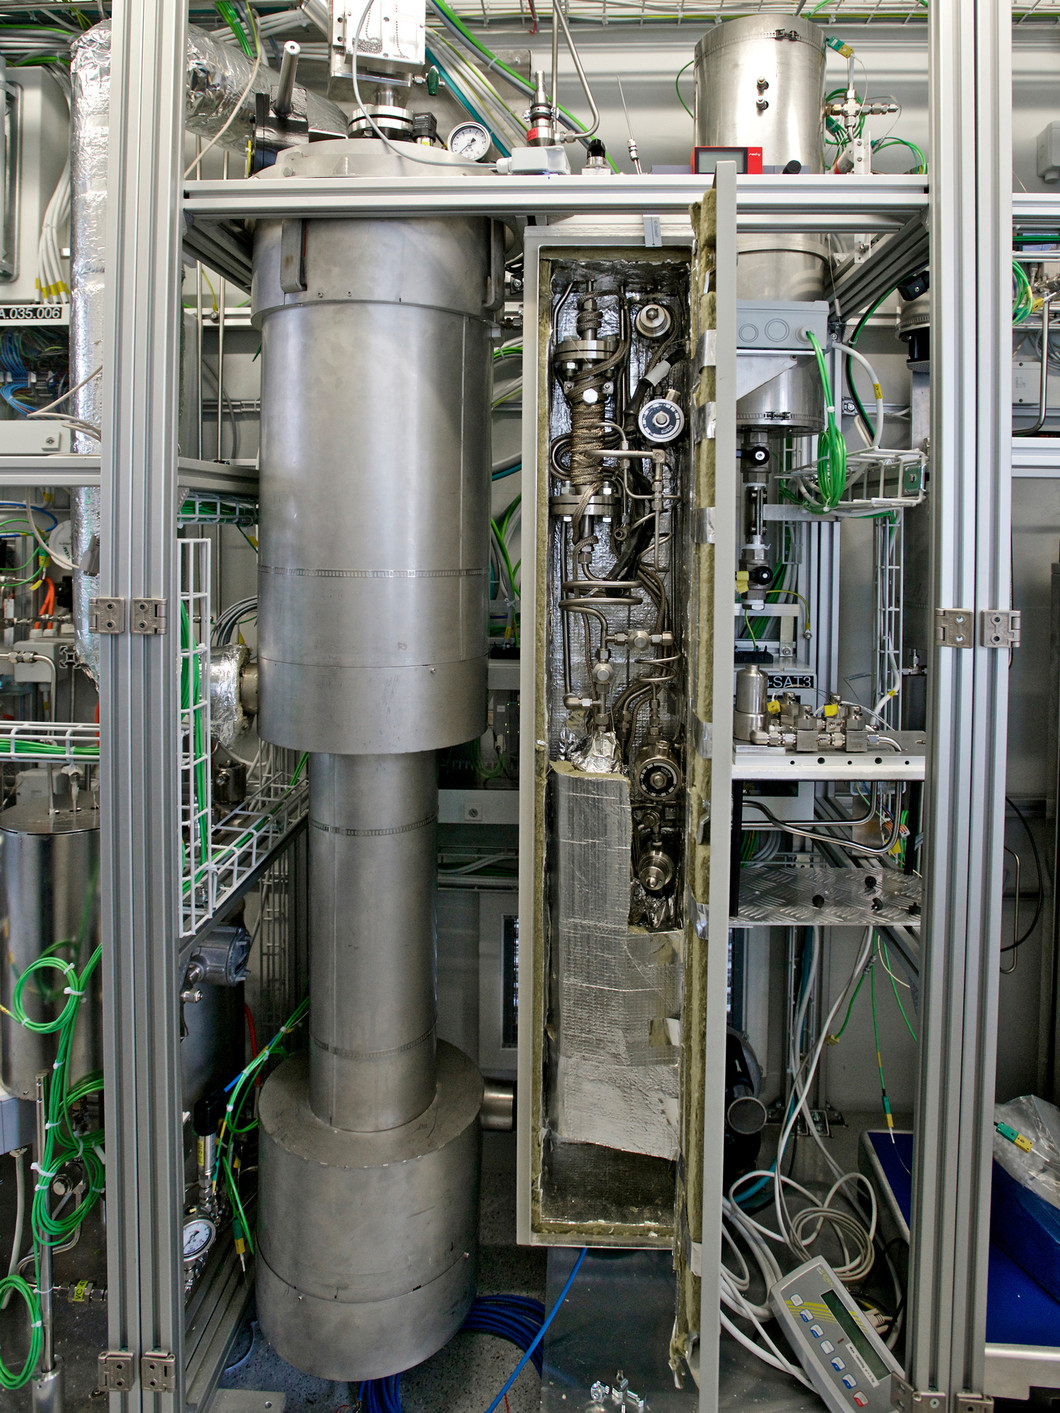 The heart of the technology is the so-called fluidised bed reactor. In it CO2 and hydrogen are combined to form methane and water. (Photo: Paul Scherrer Institute/Markus Fischer)